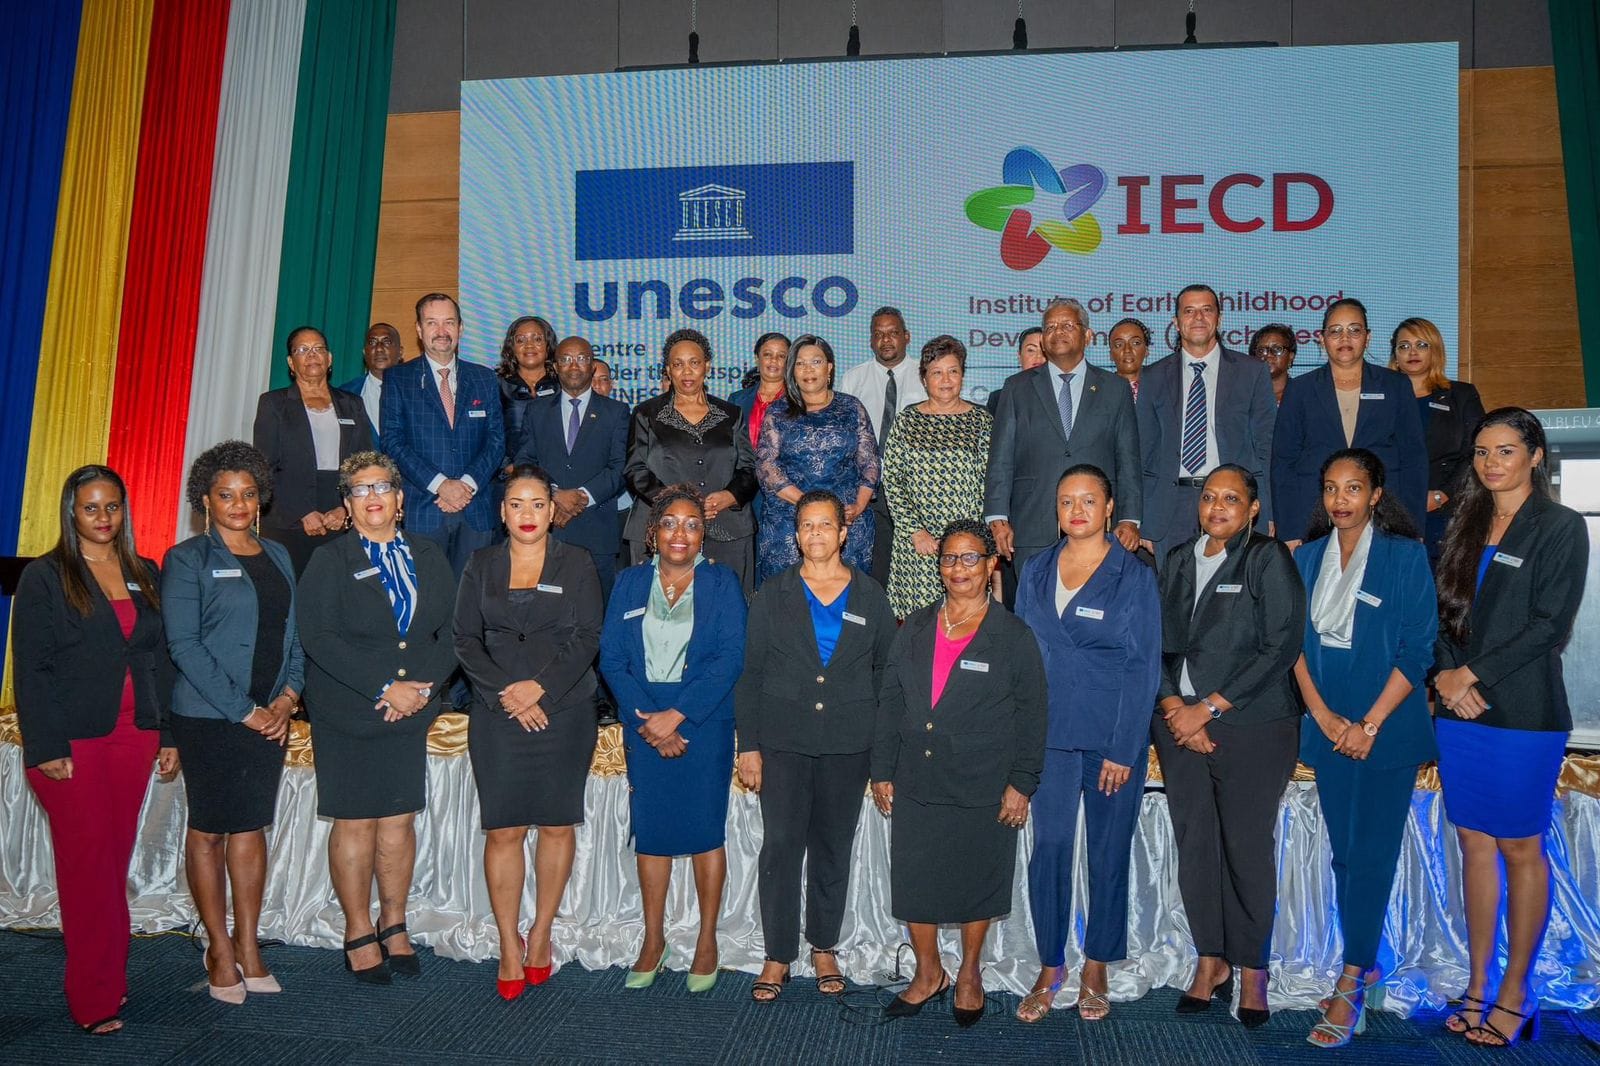 IECD Inaugurated as Category 2 Centre under the Auspices of UNESCO